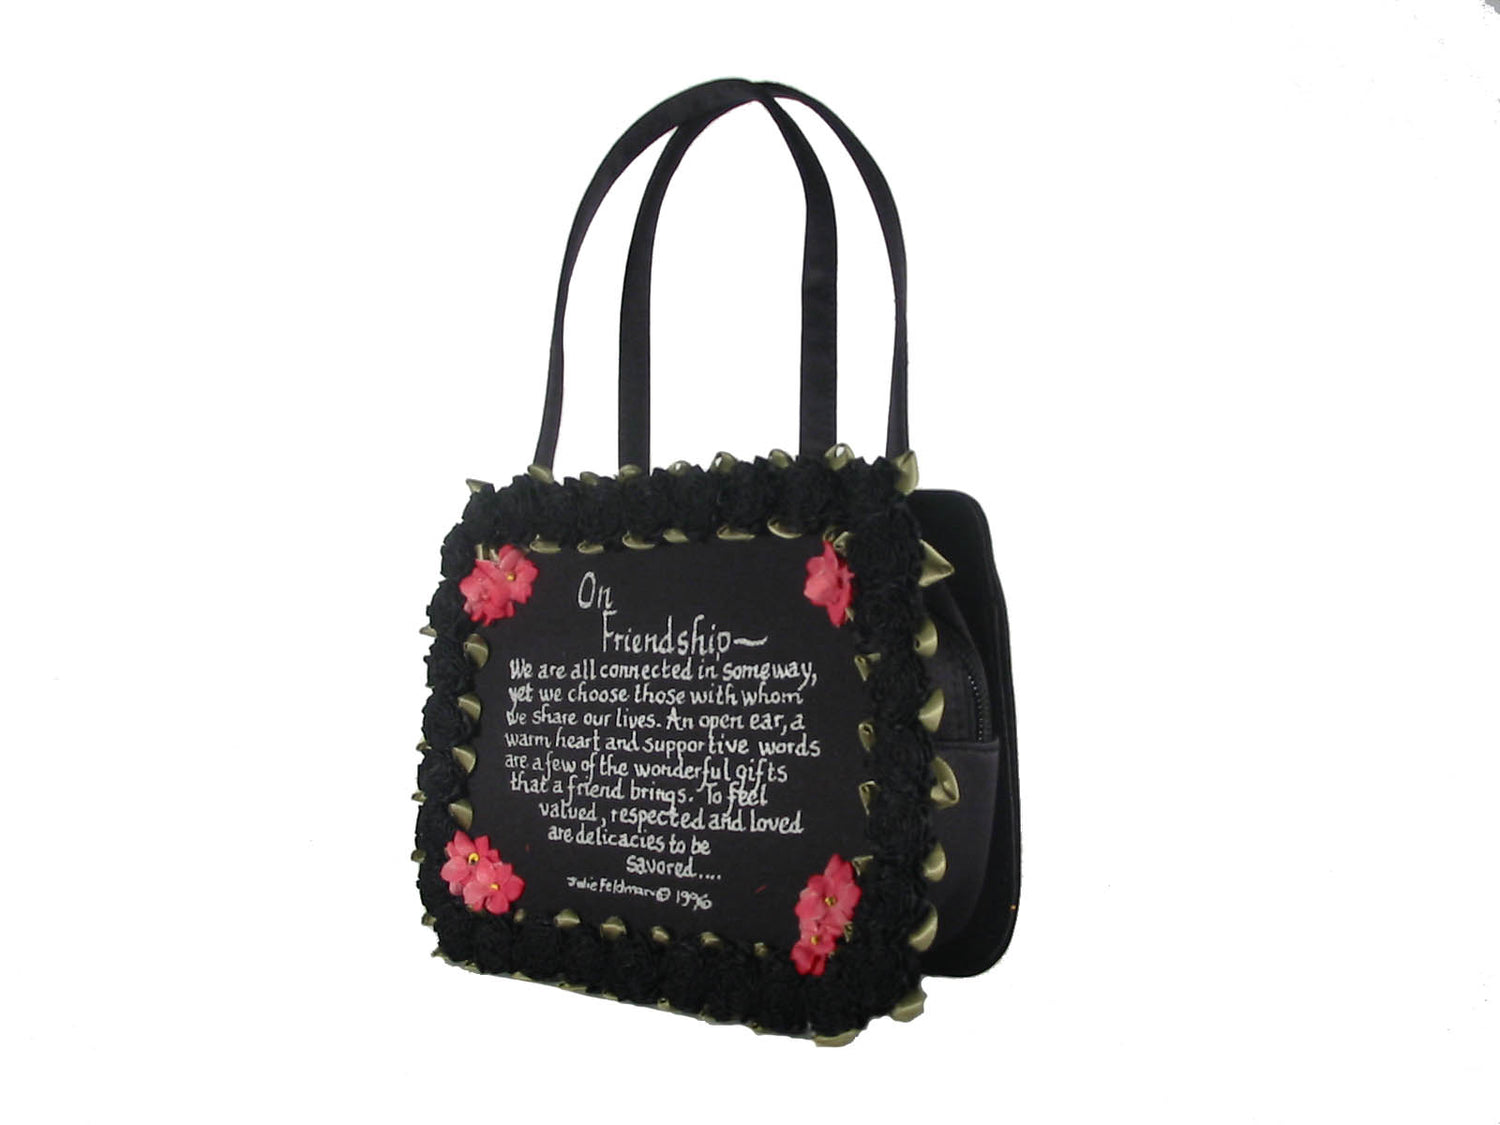 black satin evening bag with On Friendship written message with black silk carnation around the border and delicate corner flower accents